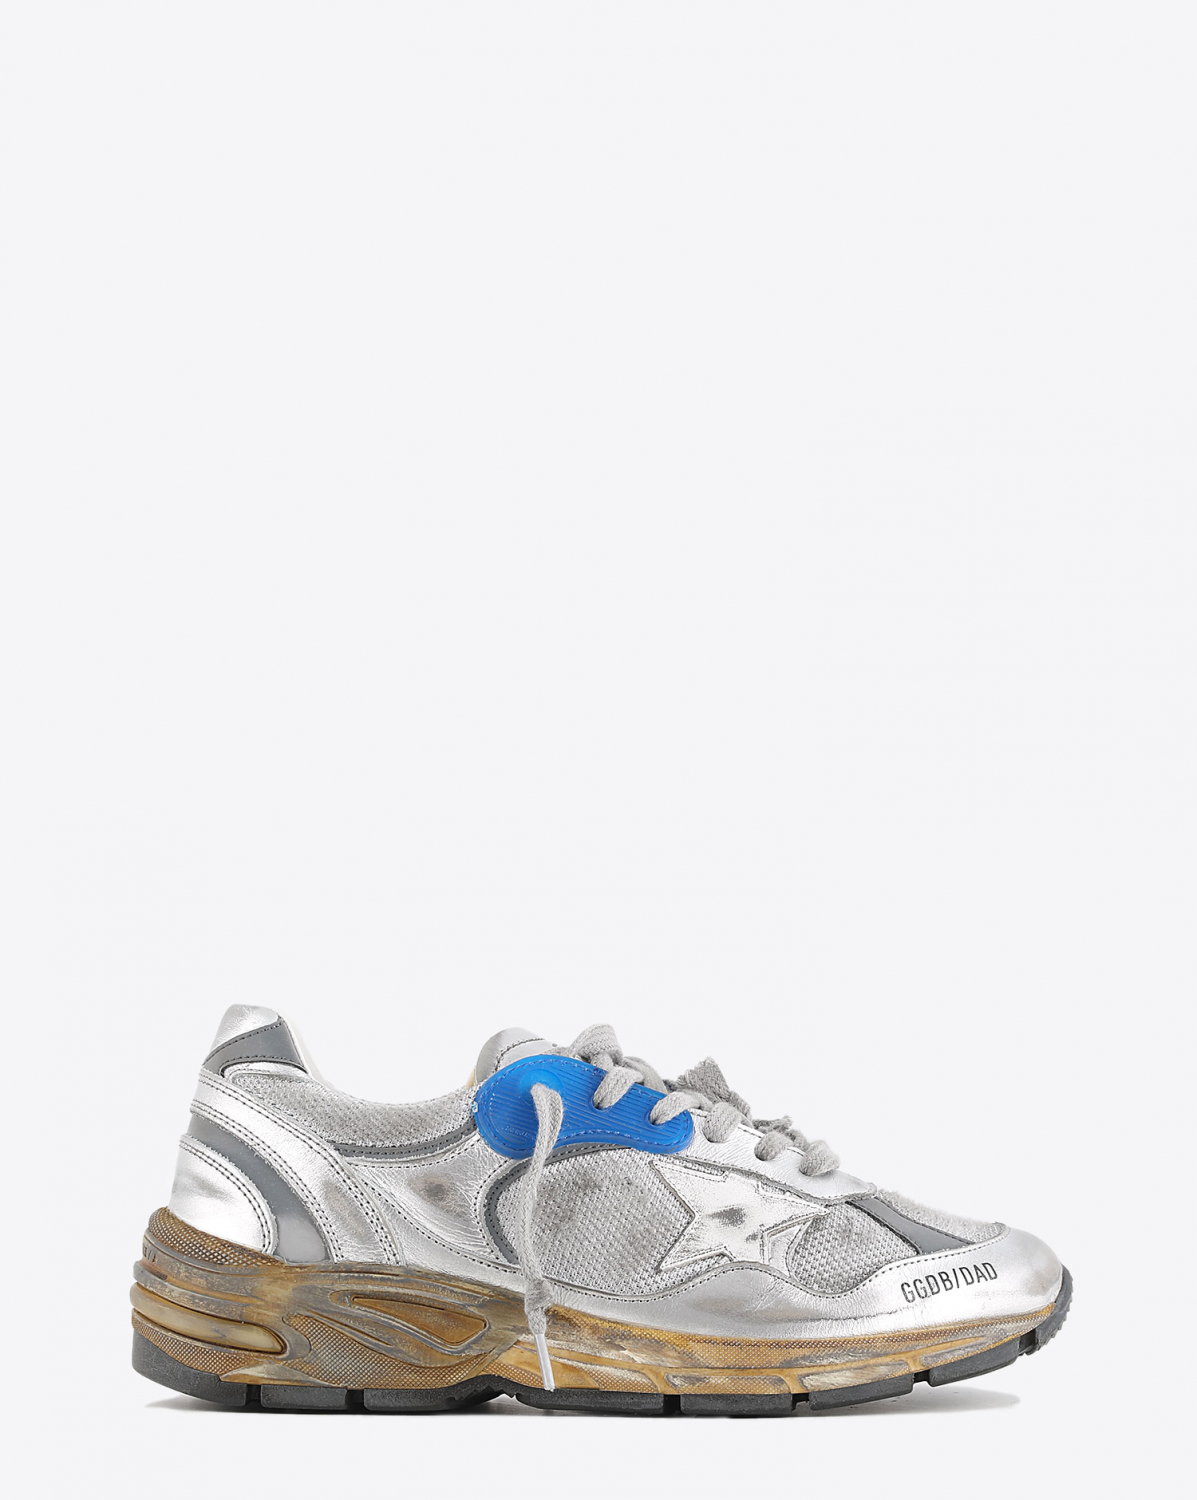 Sneakers running dad white silver 70137 Golden Goose.